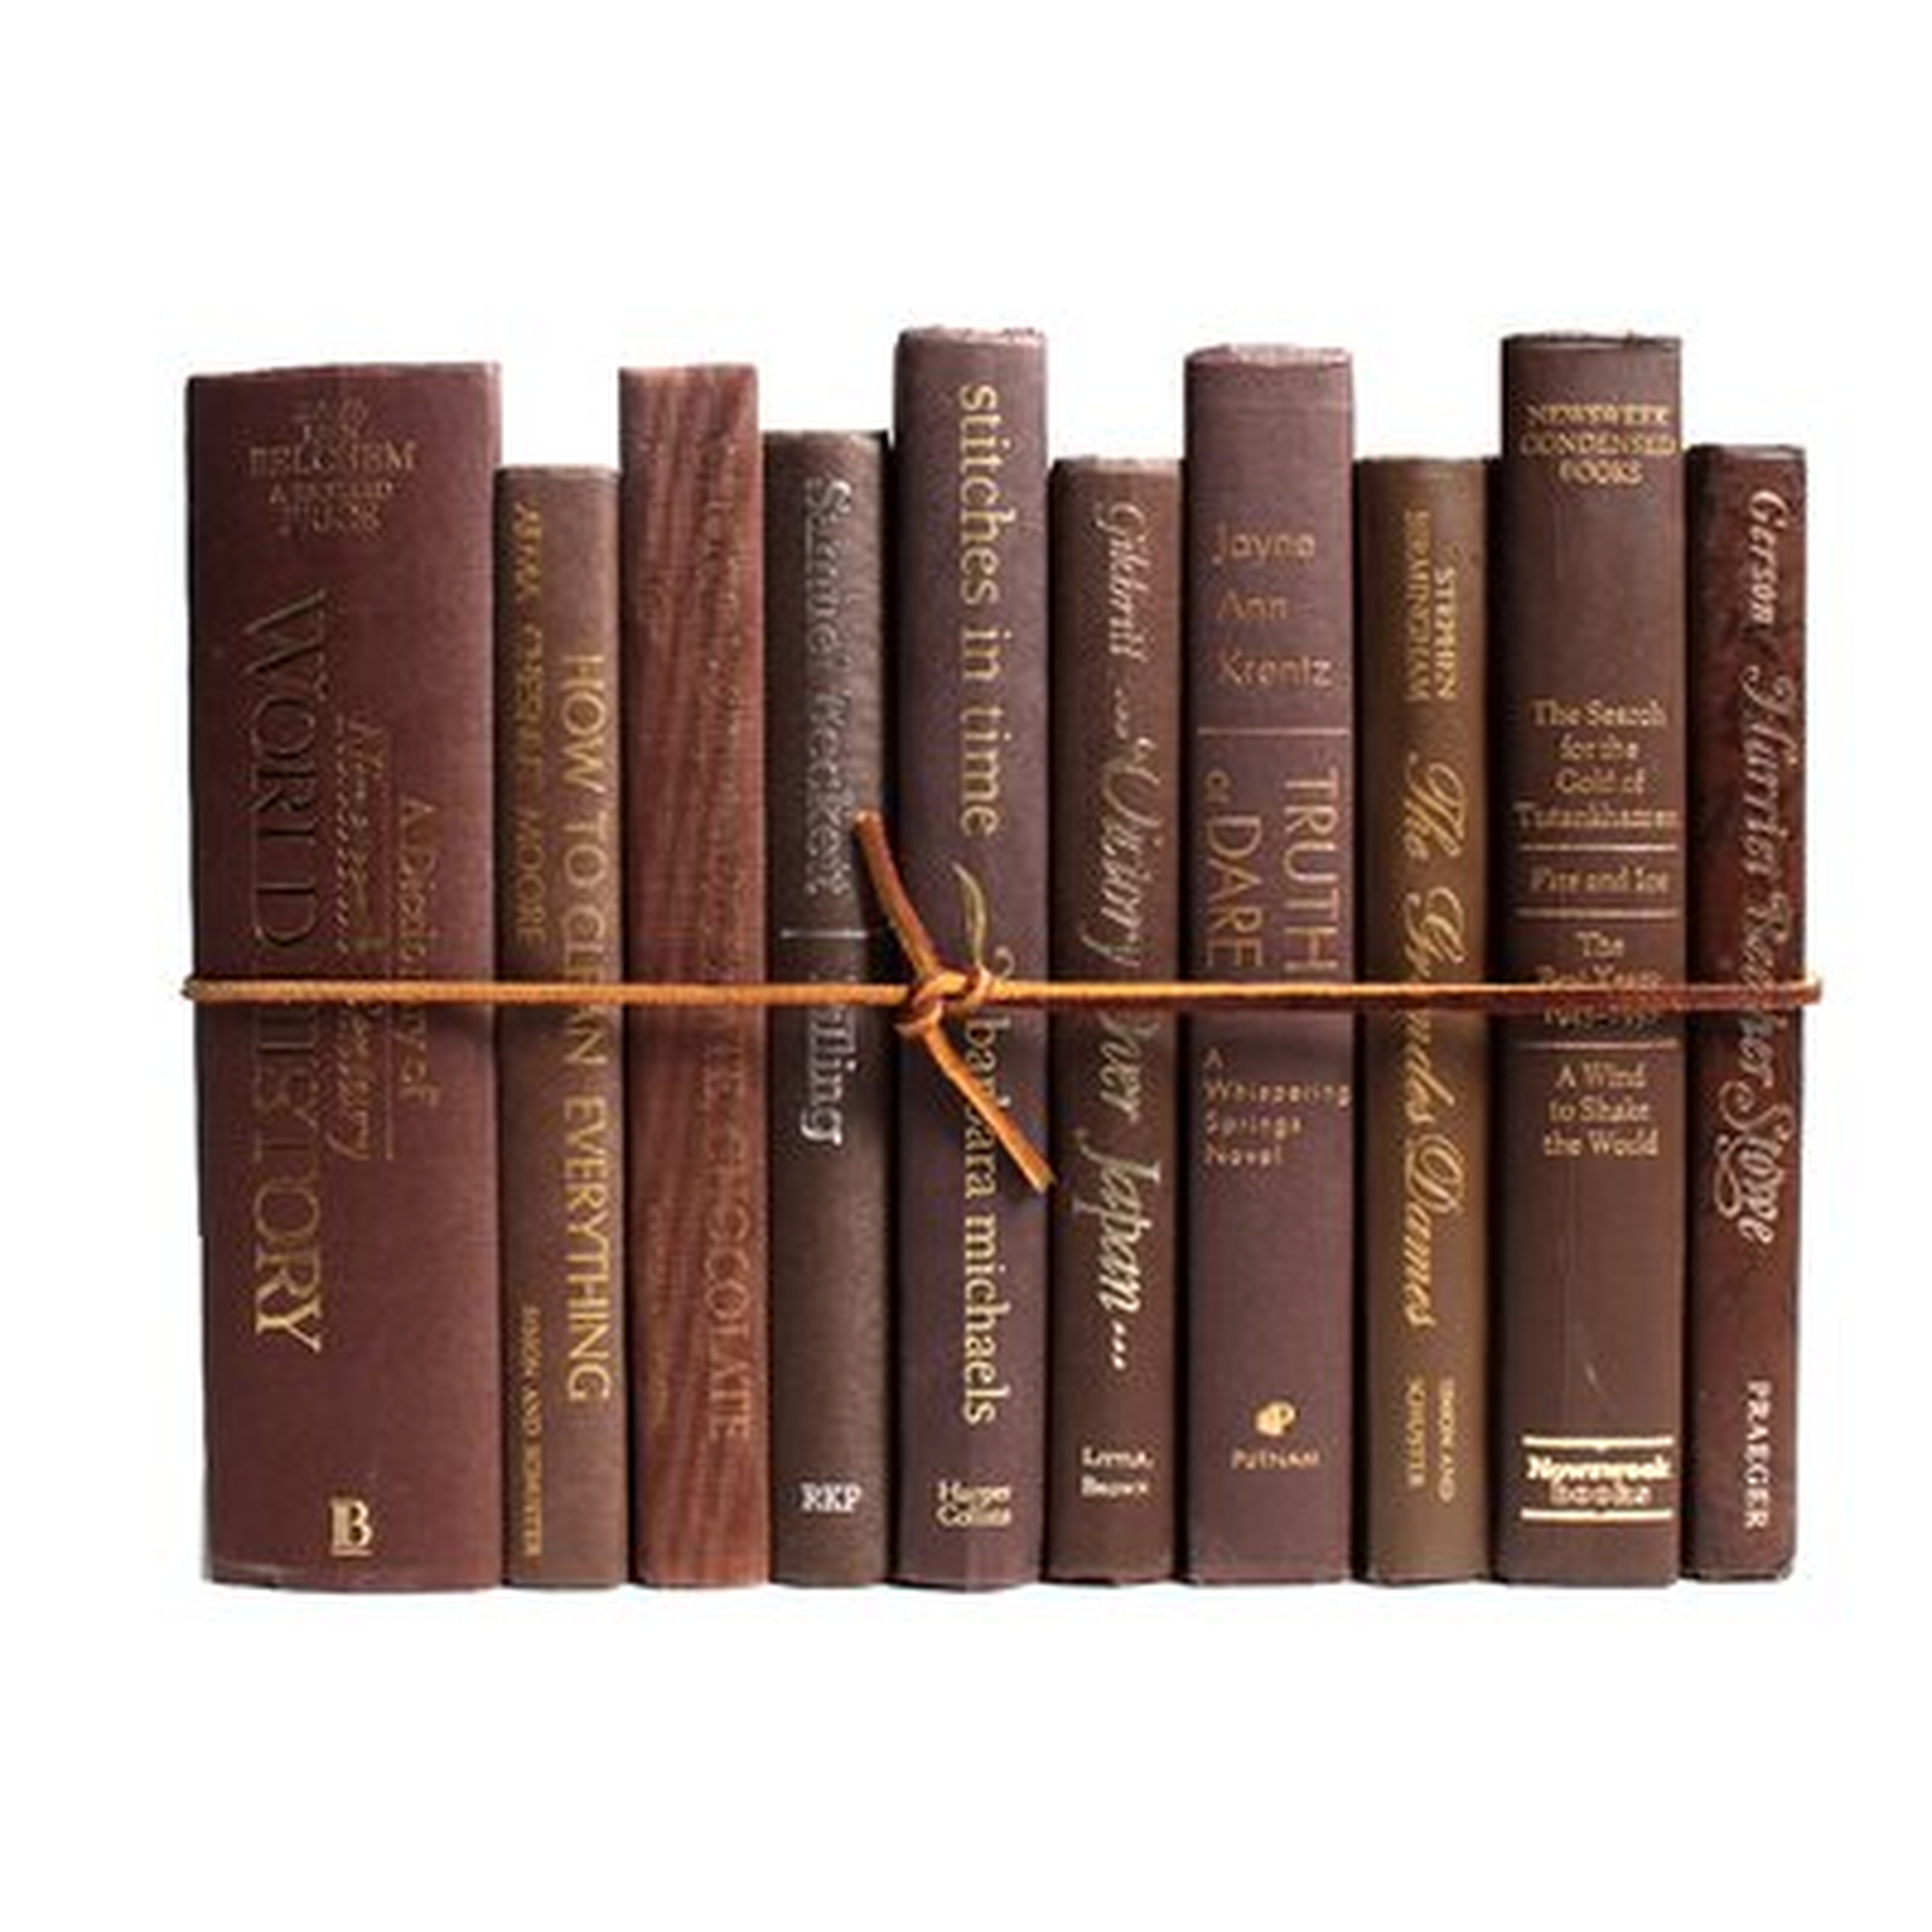 Authentic Decorative Books - By Color Modern Coffee ColorPak (1 Linear Foot, 10-12 Books) - Wayfair